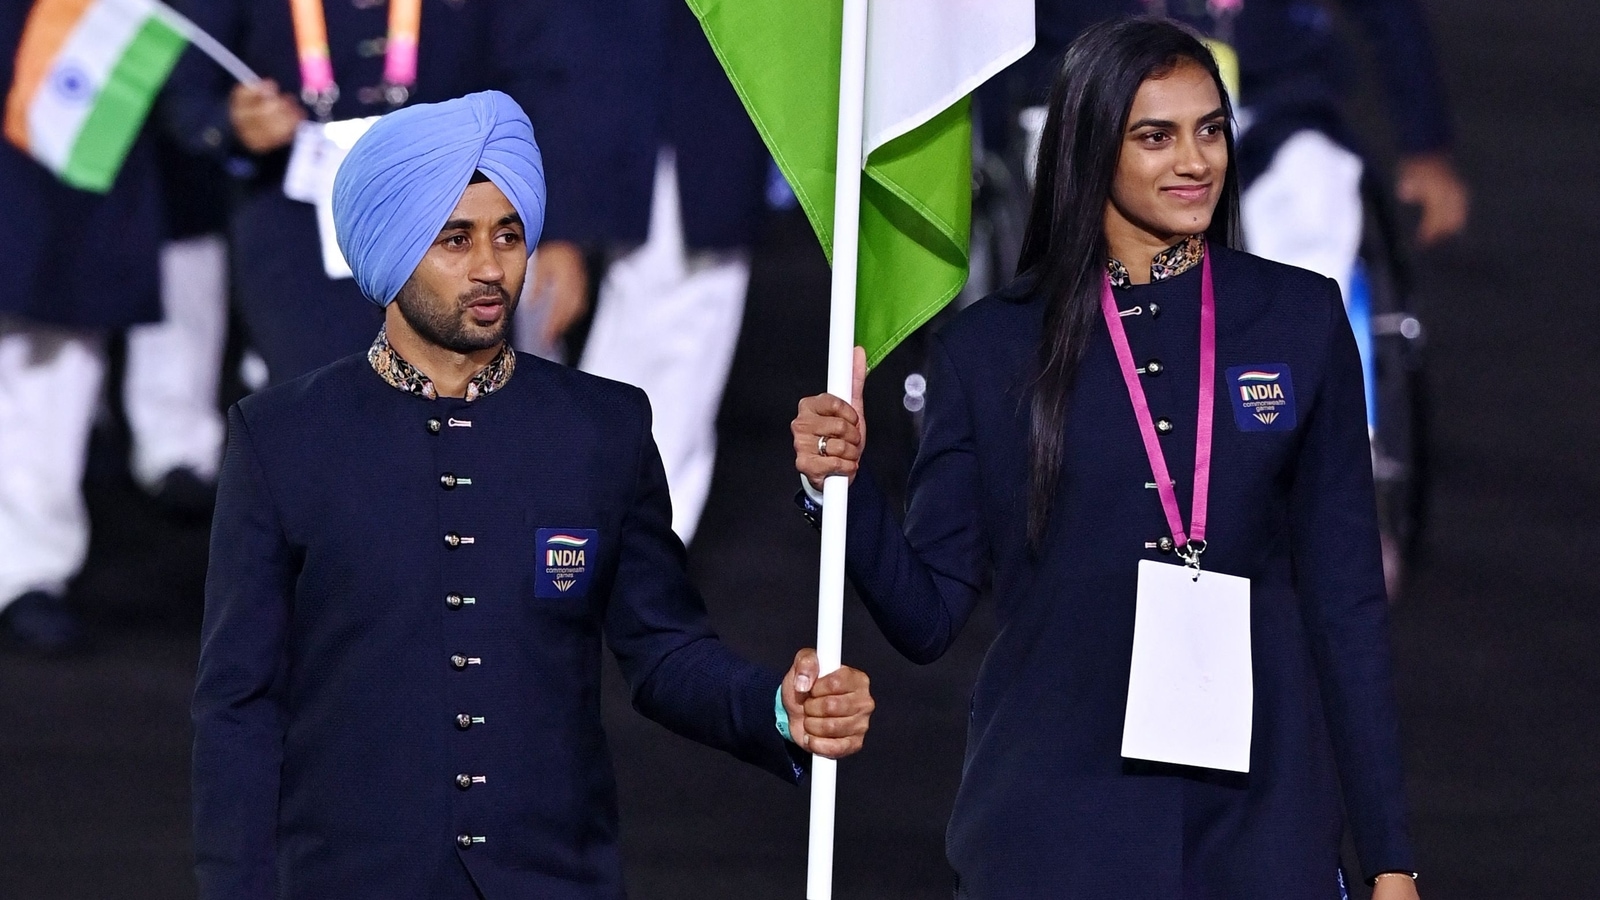 Watch Sindhu, Manpreet lead India contingent CWG 2022 opening ceremony